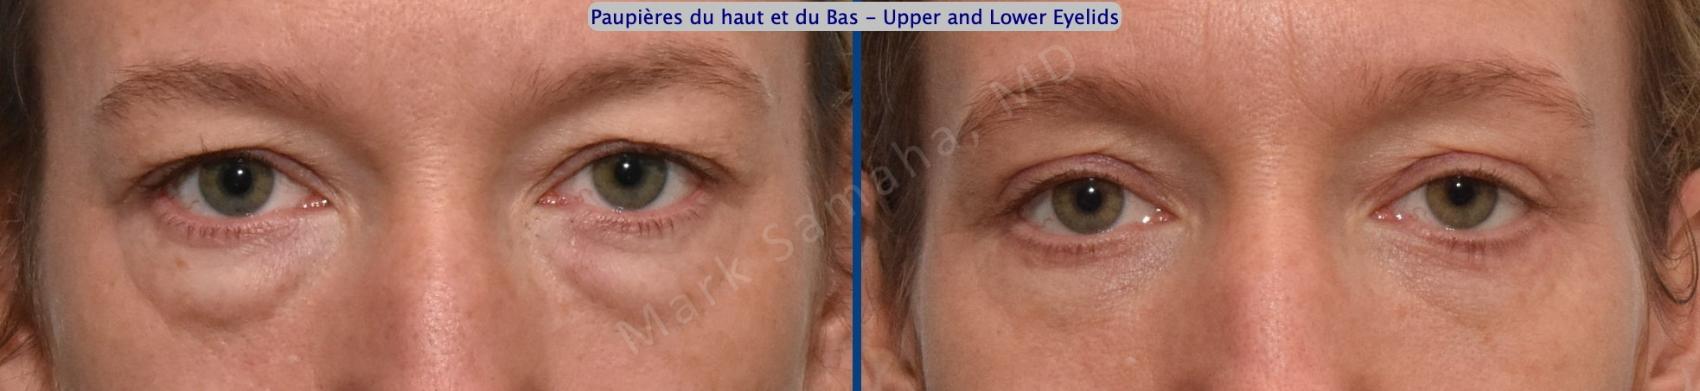 Before & After Blépharoplastie / Blepharoplasty Case 203 Front View in Montreal, QC